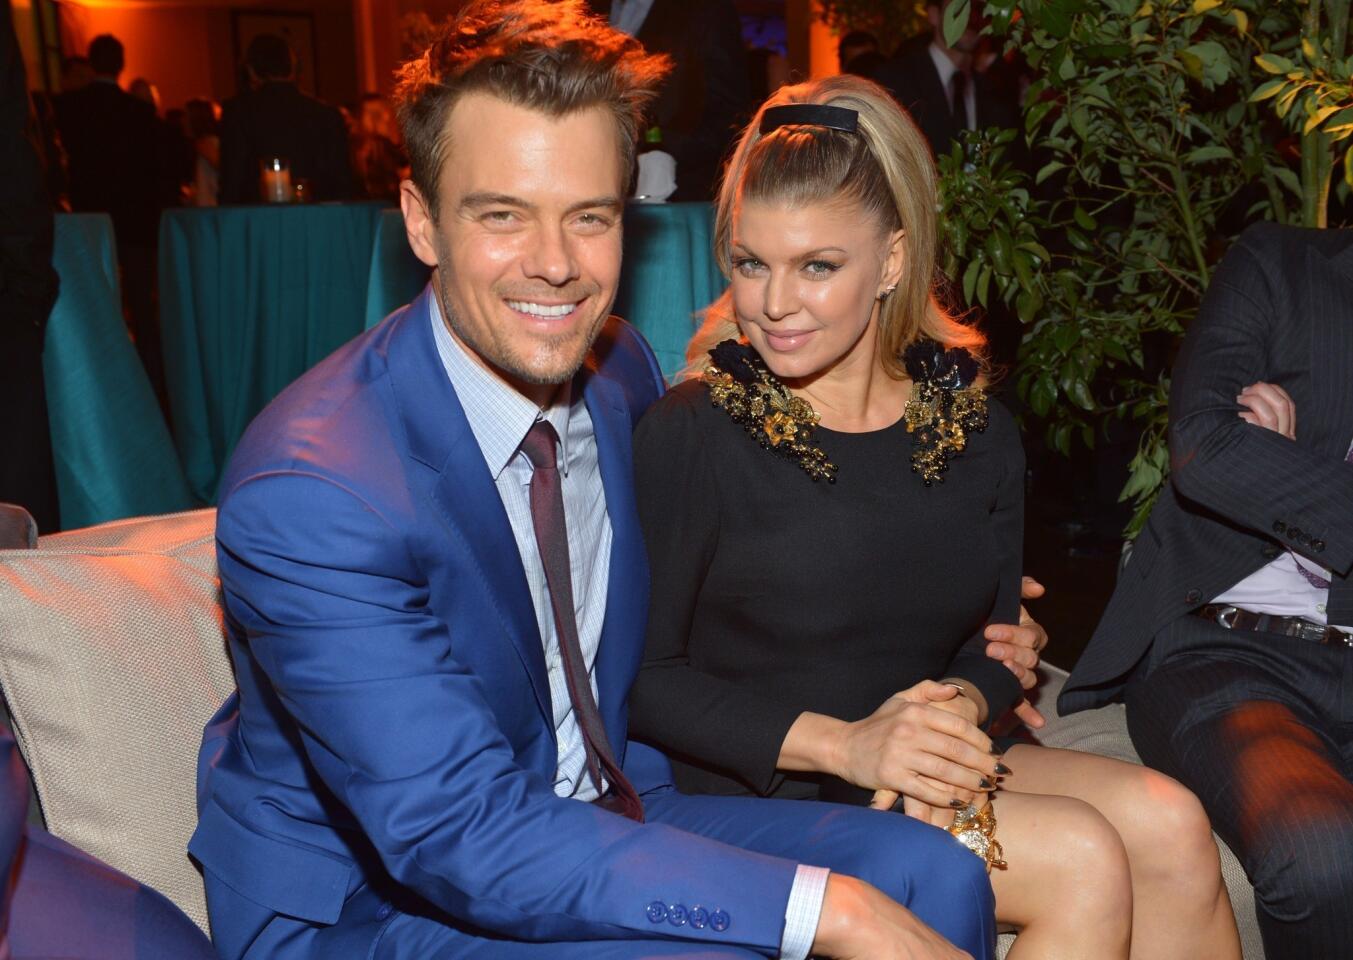 "Safe Haven" actor Josh Duhamel and his wife, actress-singer Fergie, attend the premiere of Relativity Media's "Safe Haven" after party in Hollywood.